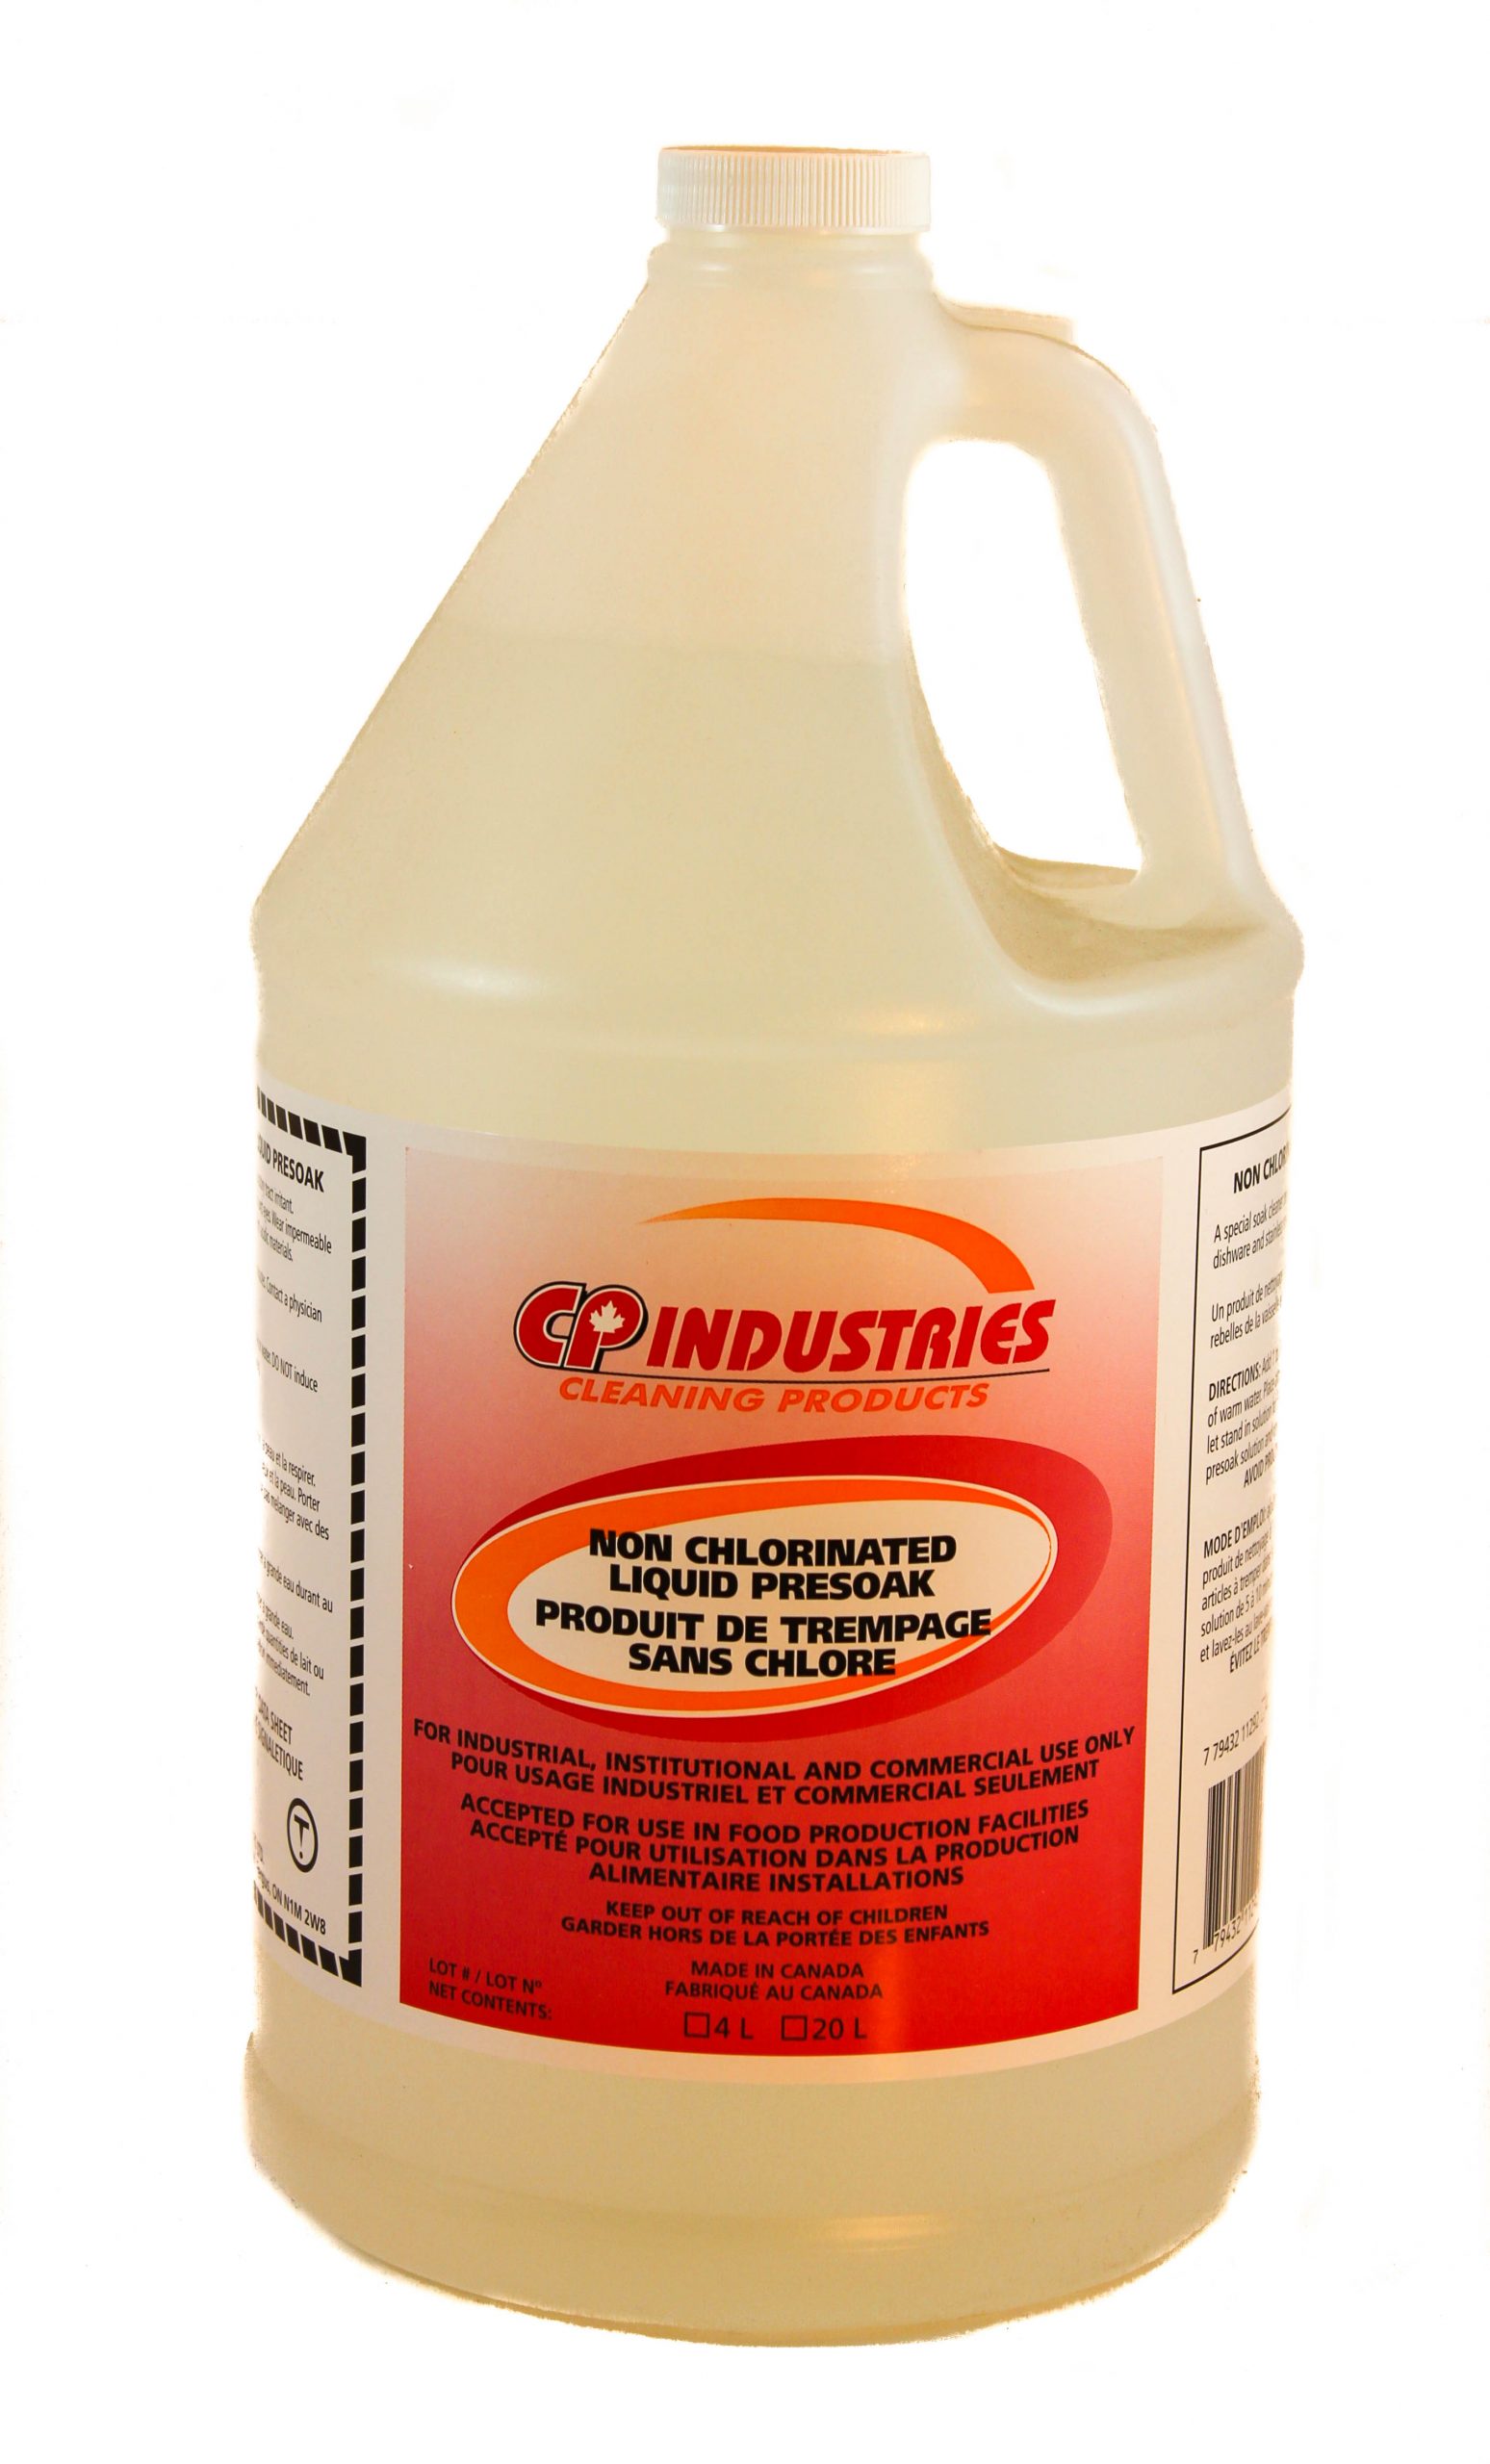 CP Industries: Non Chlorinated Liquid Presoak for industrial, institutional and commercial use only